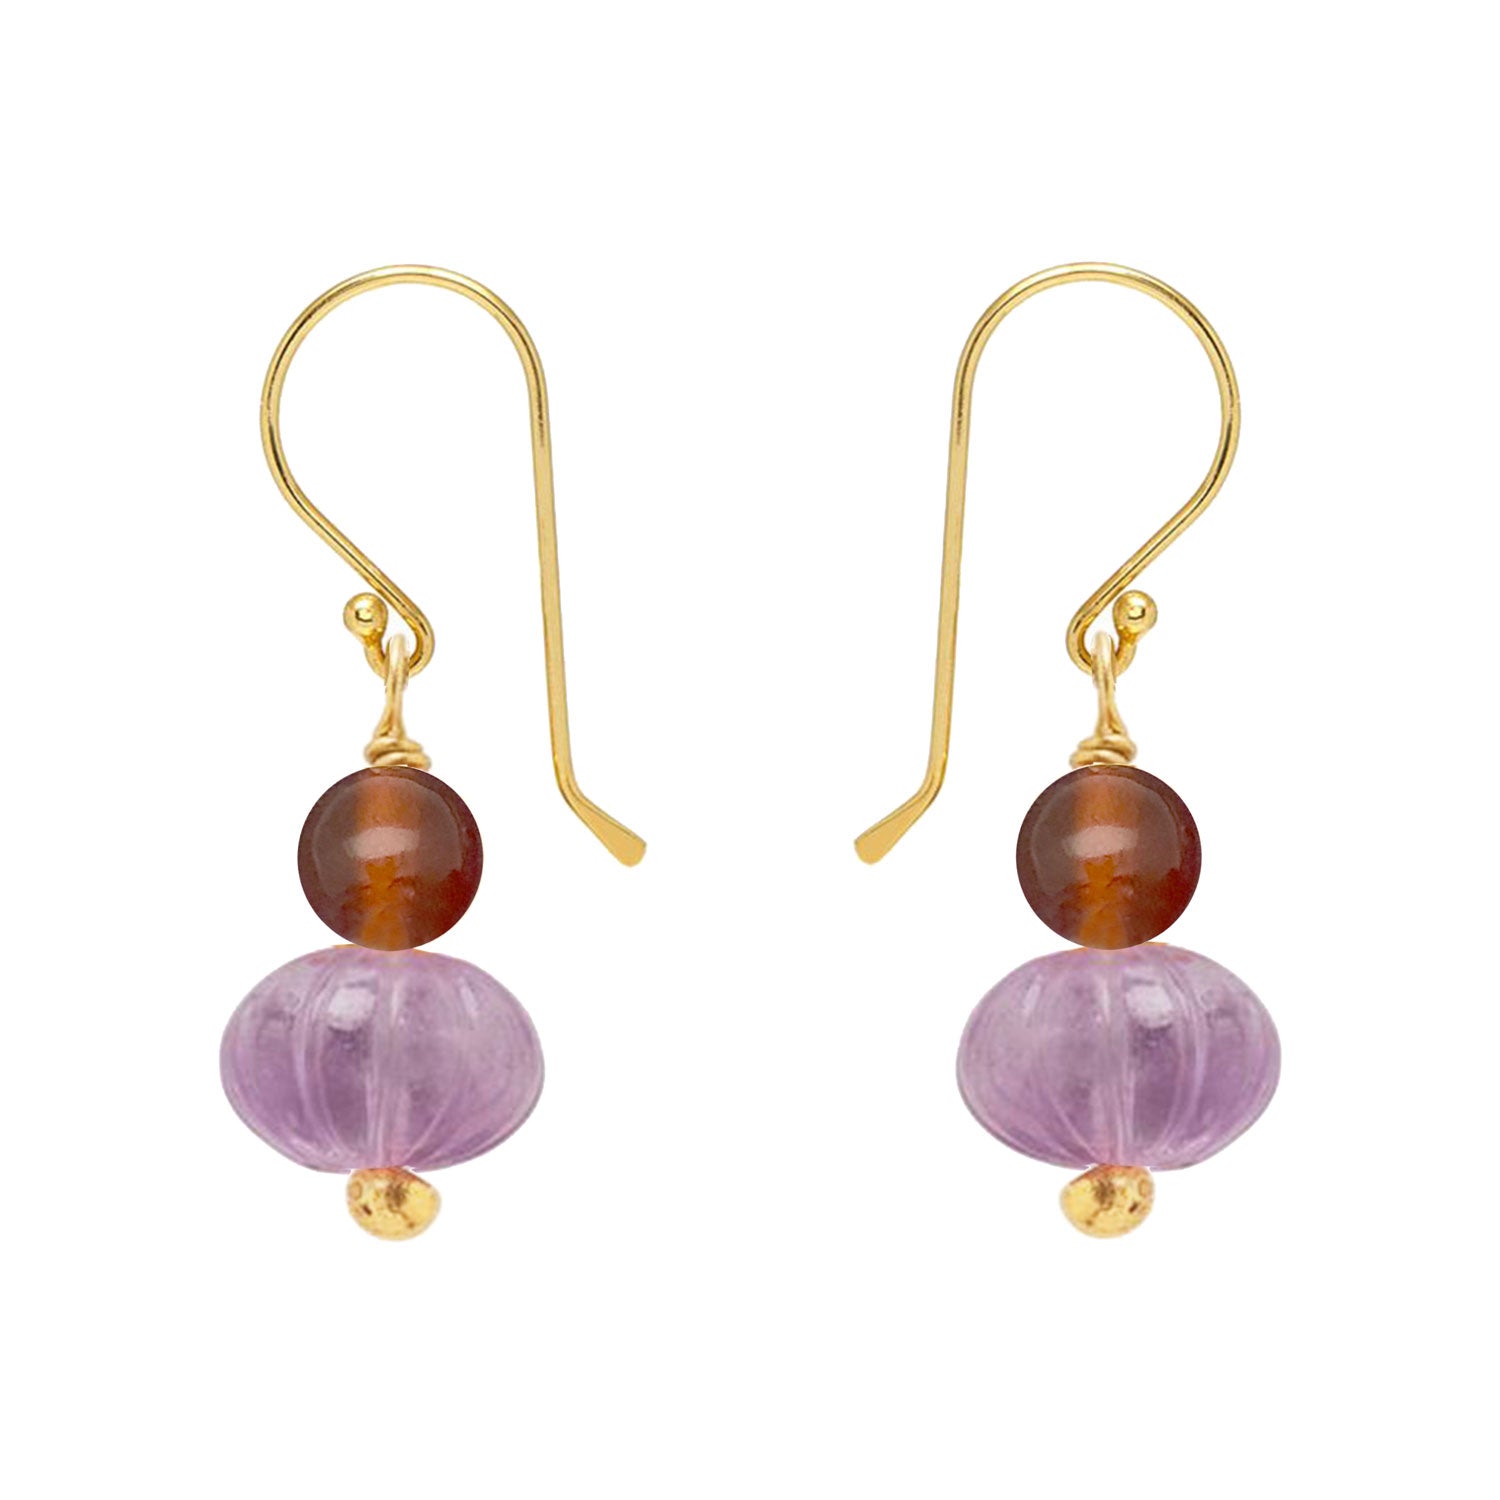 Carved Amethyst and Carnelian Duo Earrings